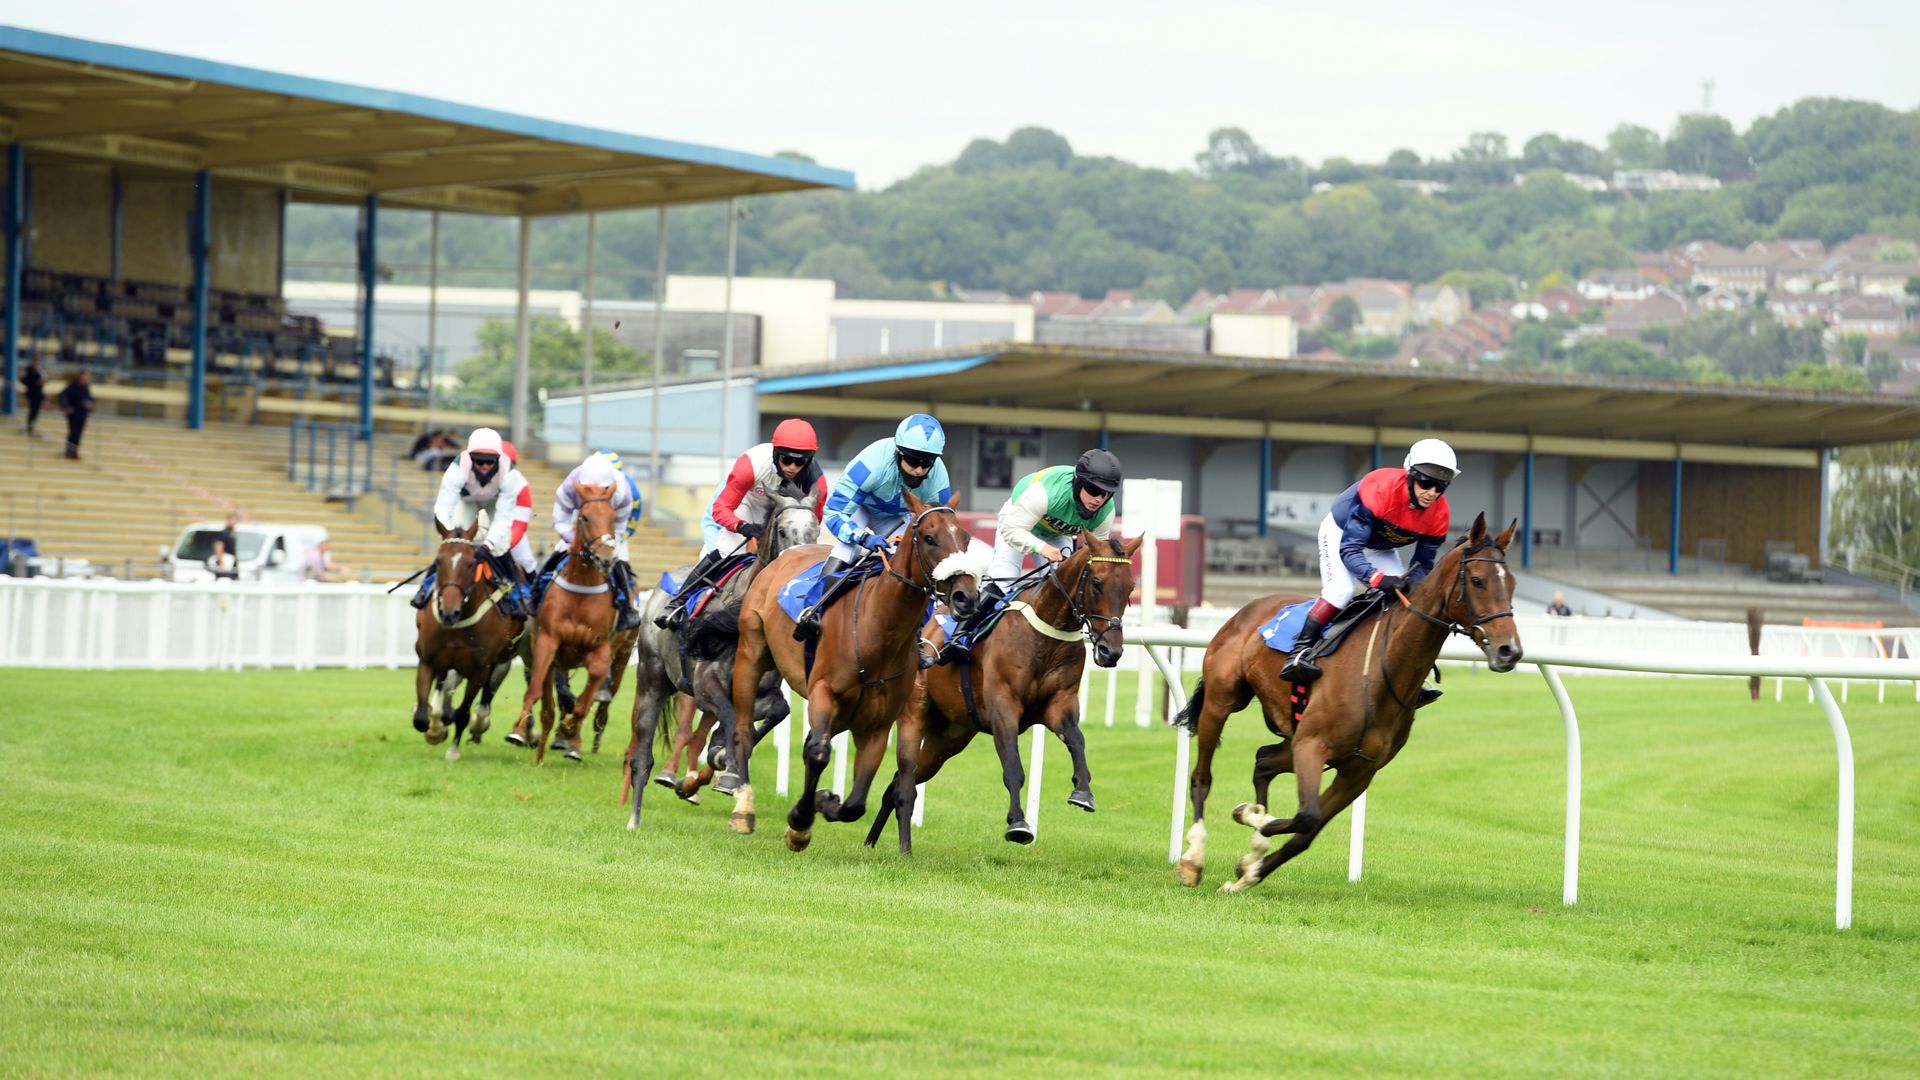 Today on Sky Sports Racing: Our Dylan seeks hat-trick at Newton Abbot